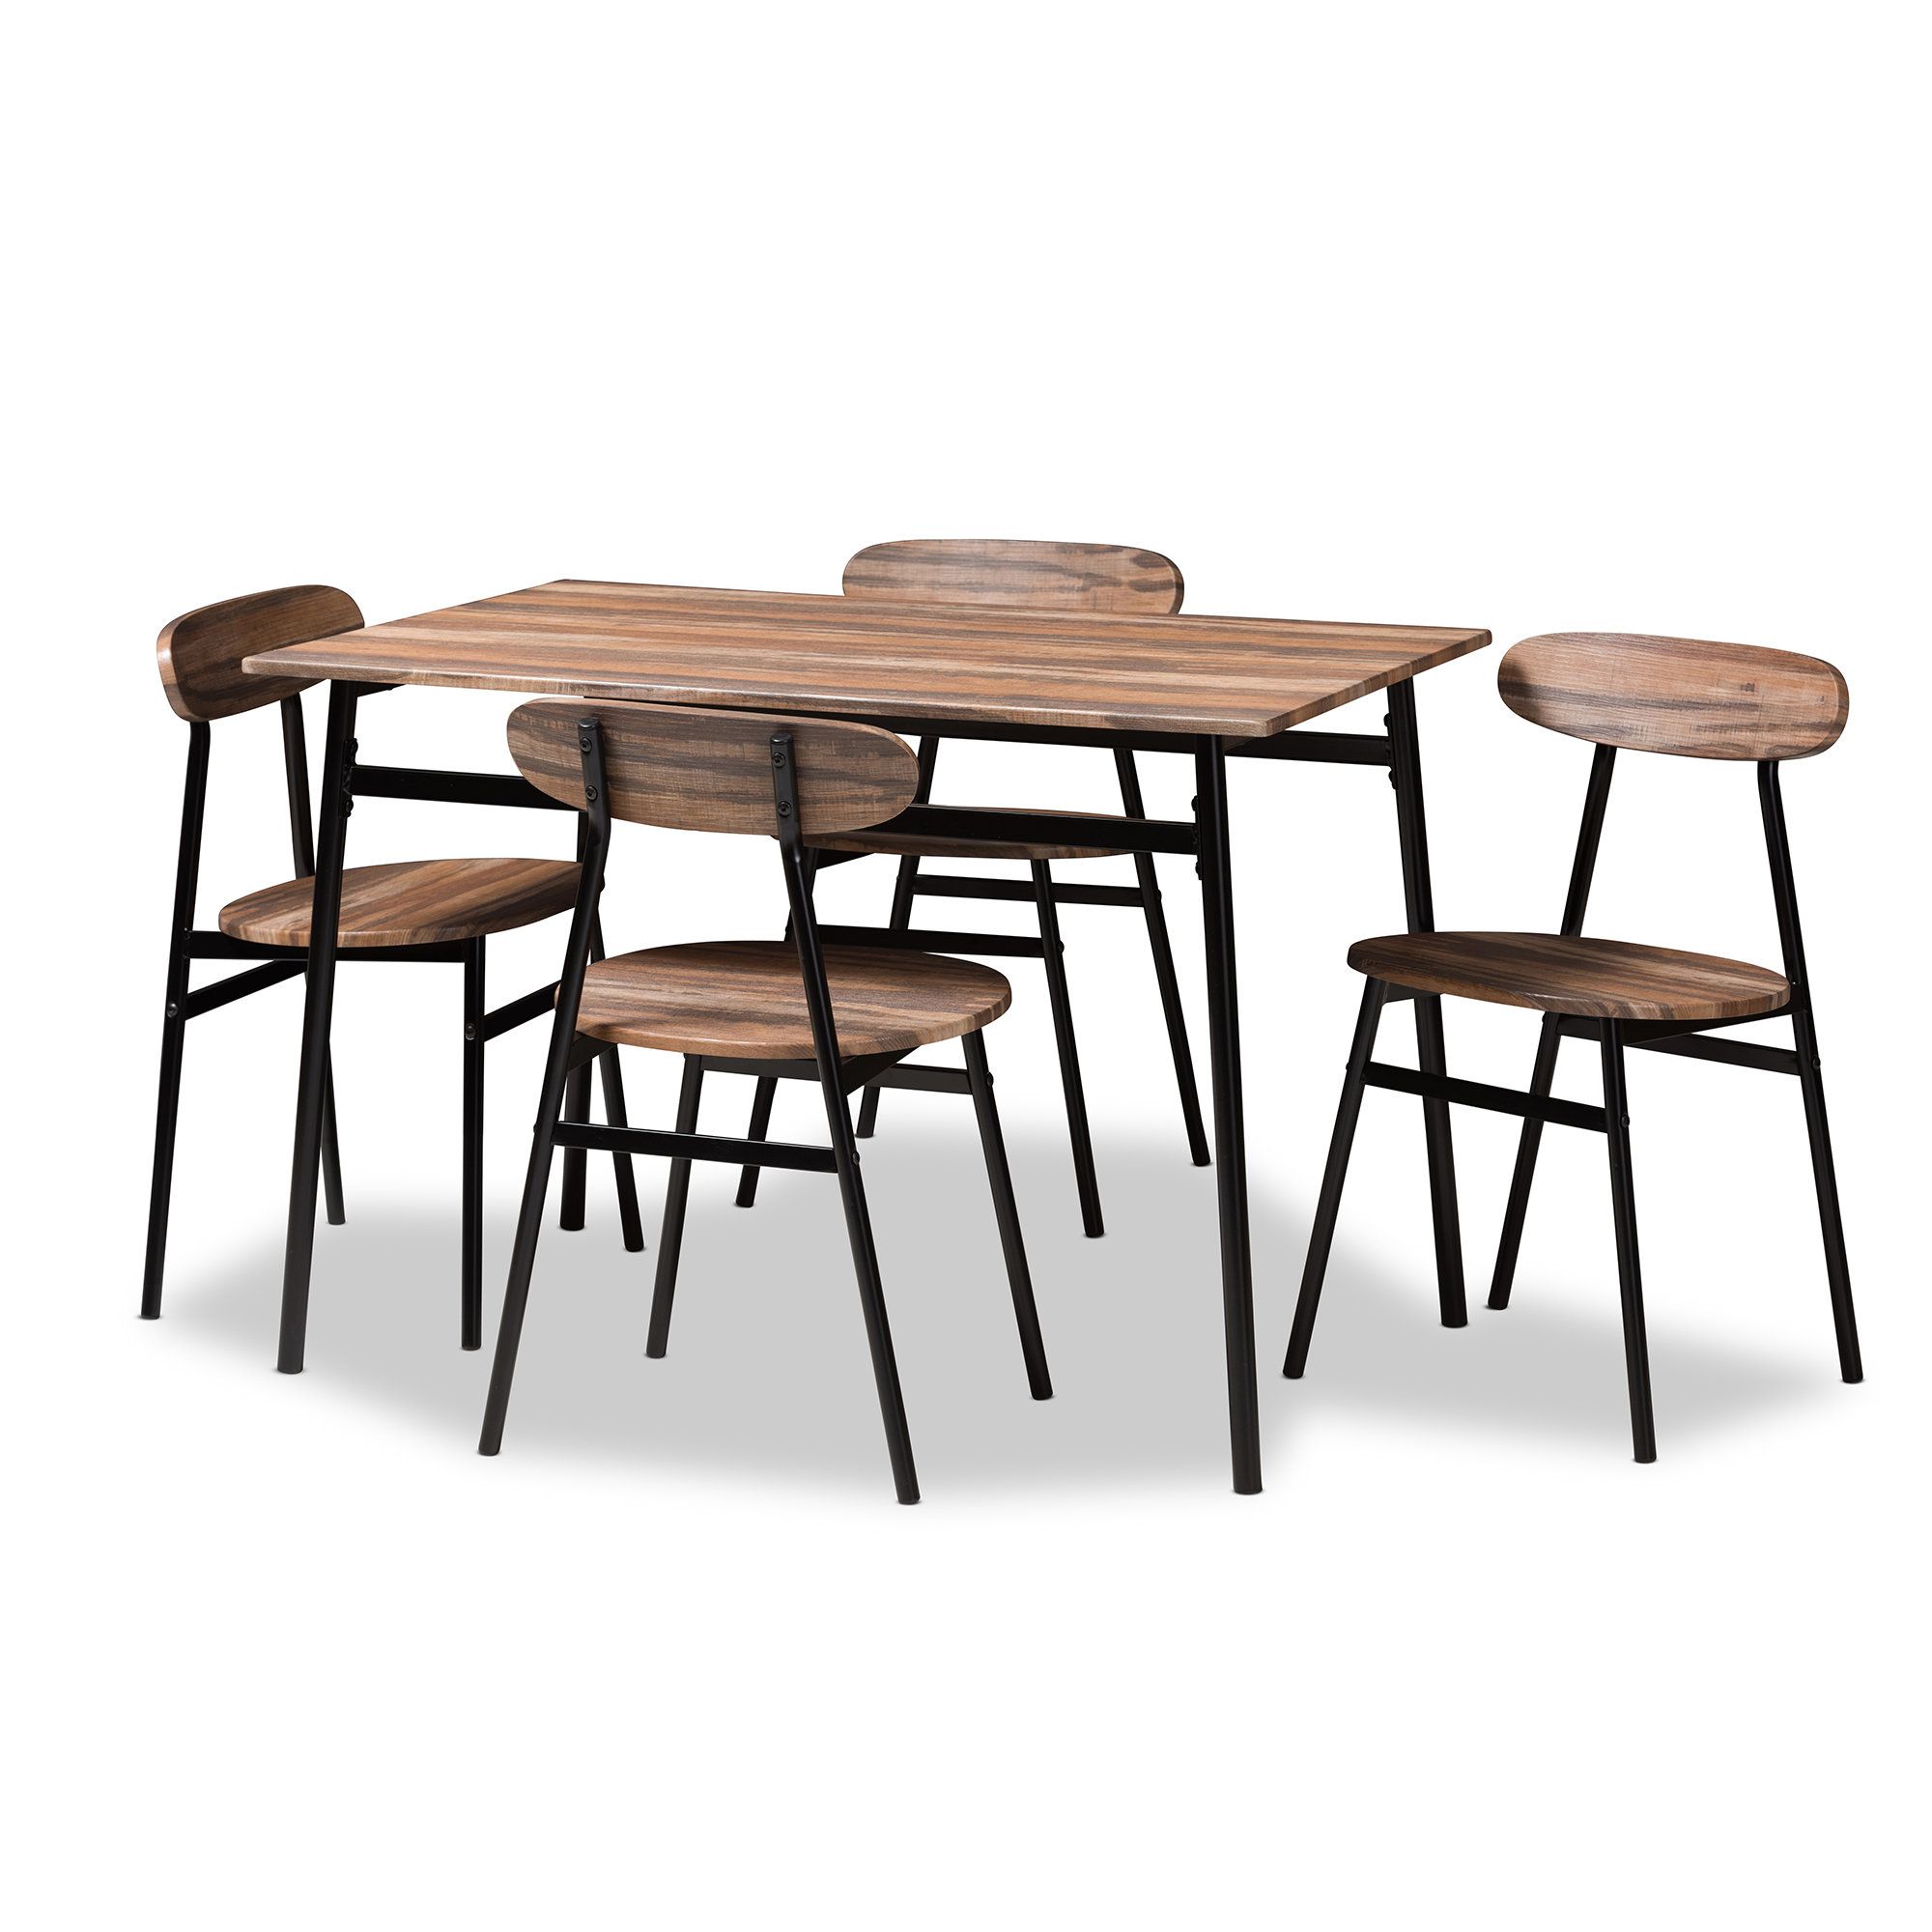 Preferred Telauges 5 Piece Dining Set & Reviews (View 16 of 20)